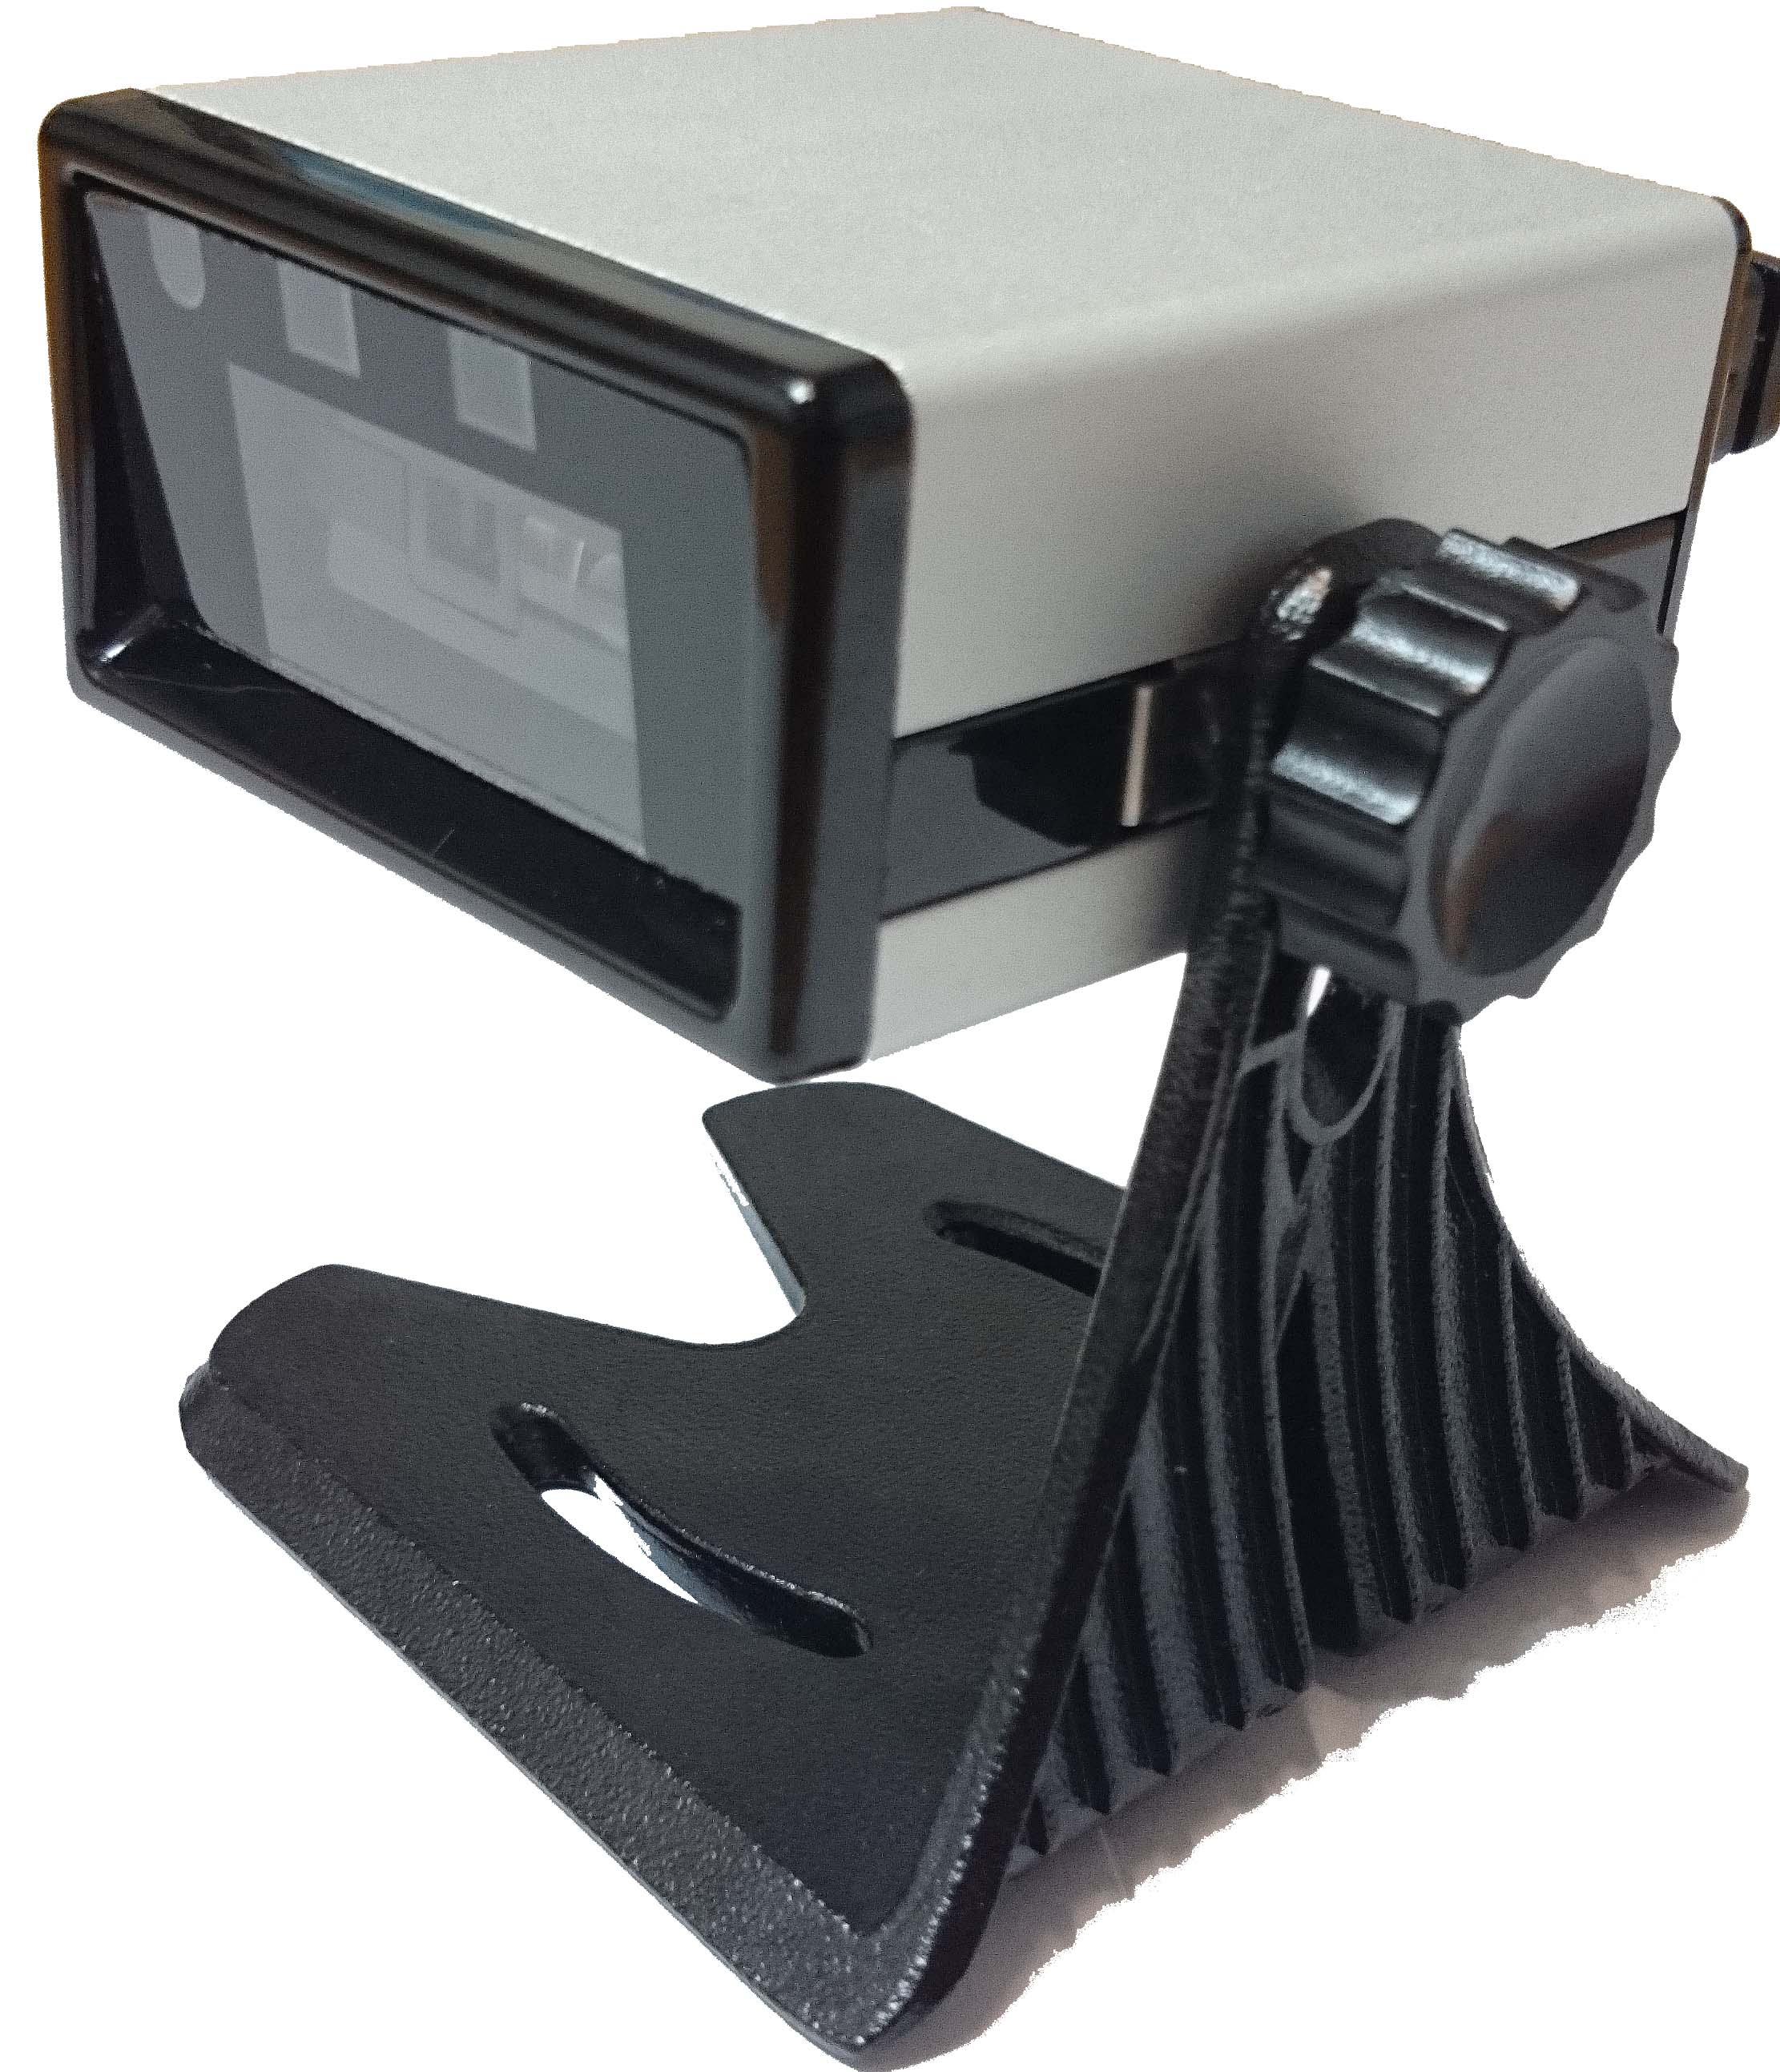 Fixed mount barcode scanner